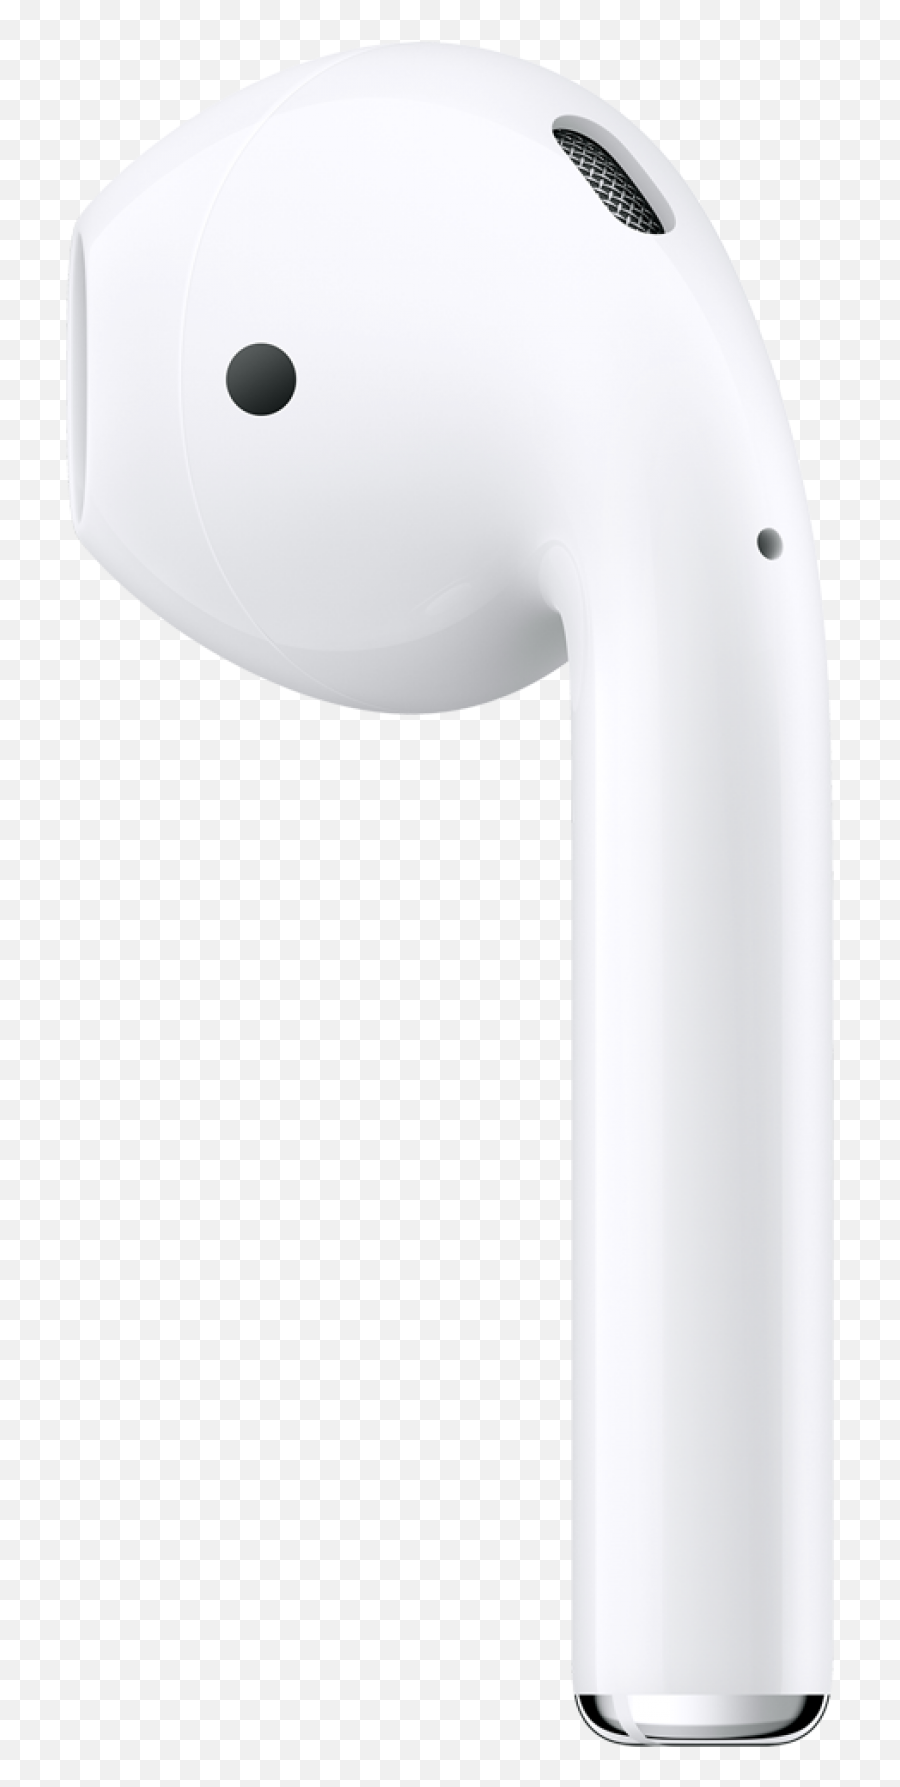 Airpod Png And Vectors For Free Download - Dlpngcom Airpod Single Transparent Background,Airpod Transparent Background